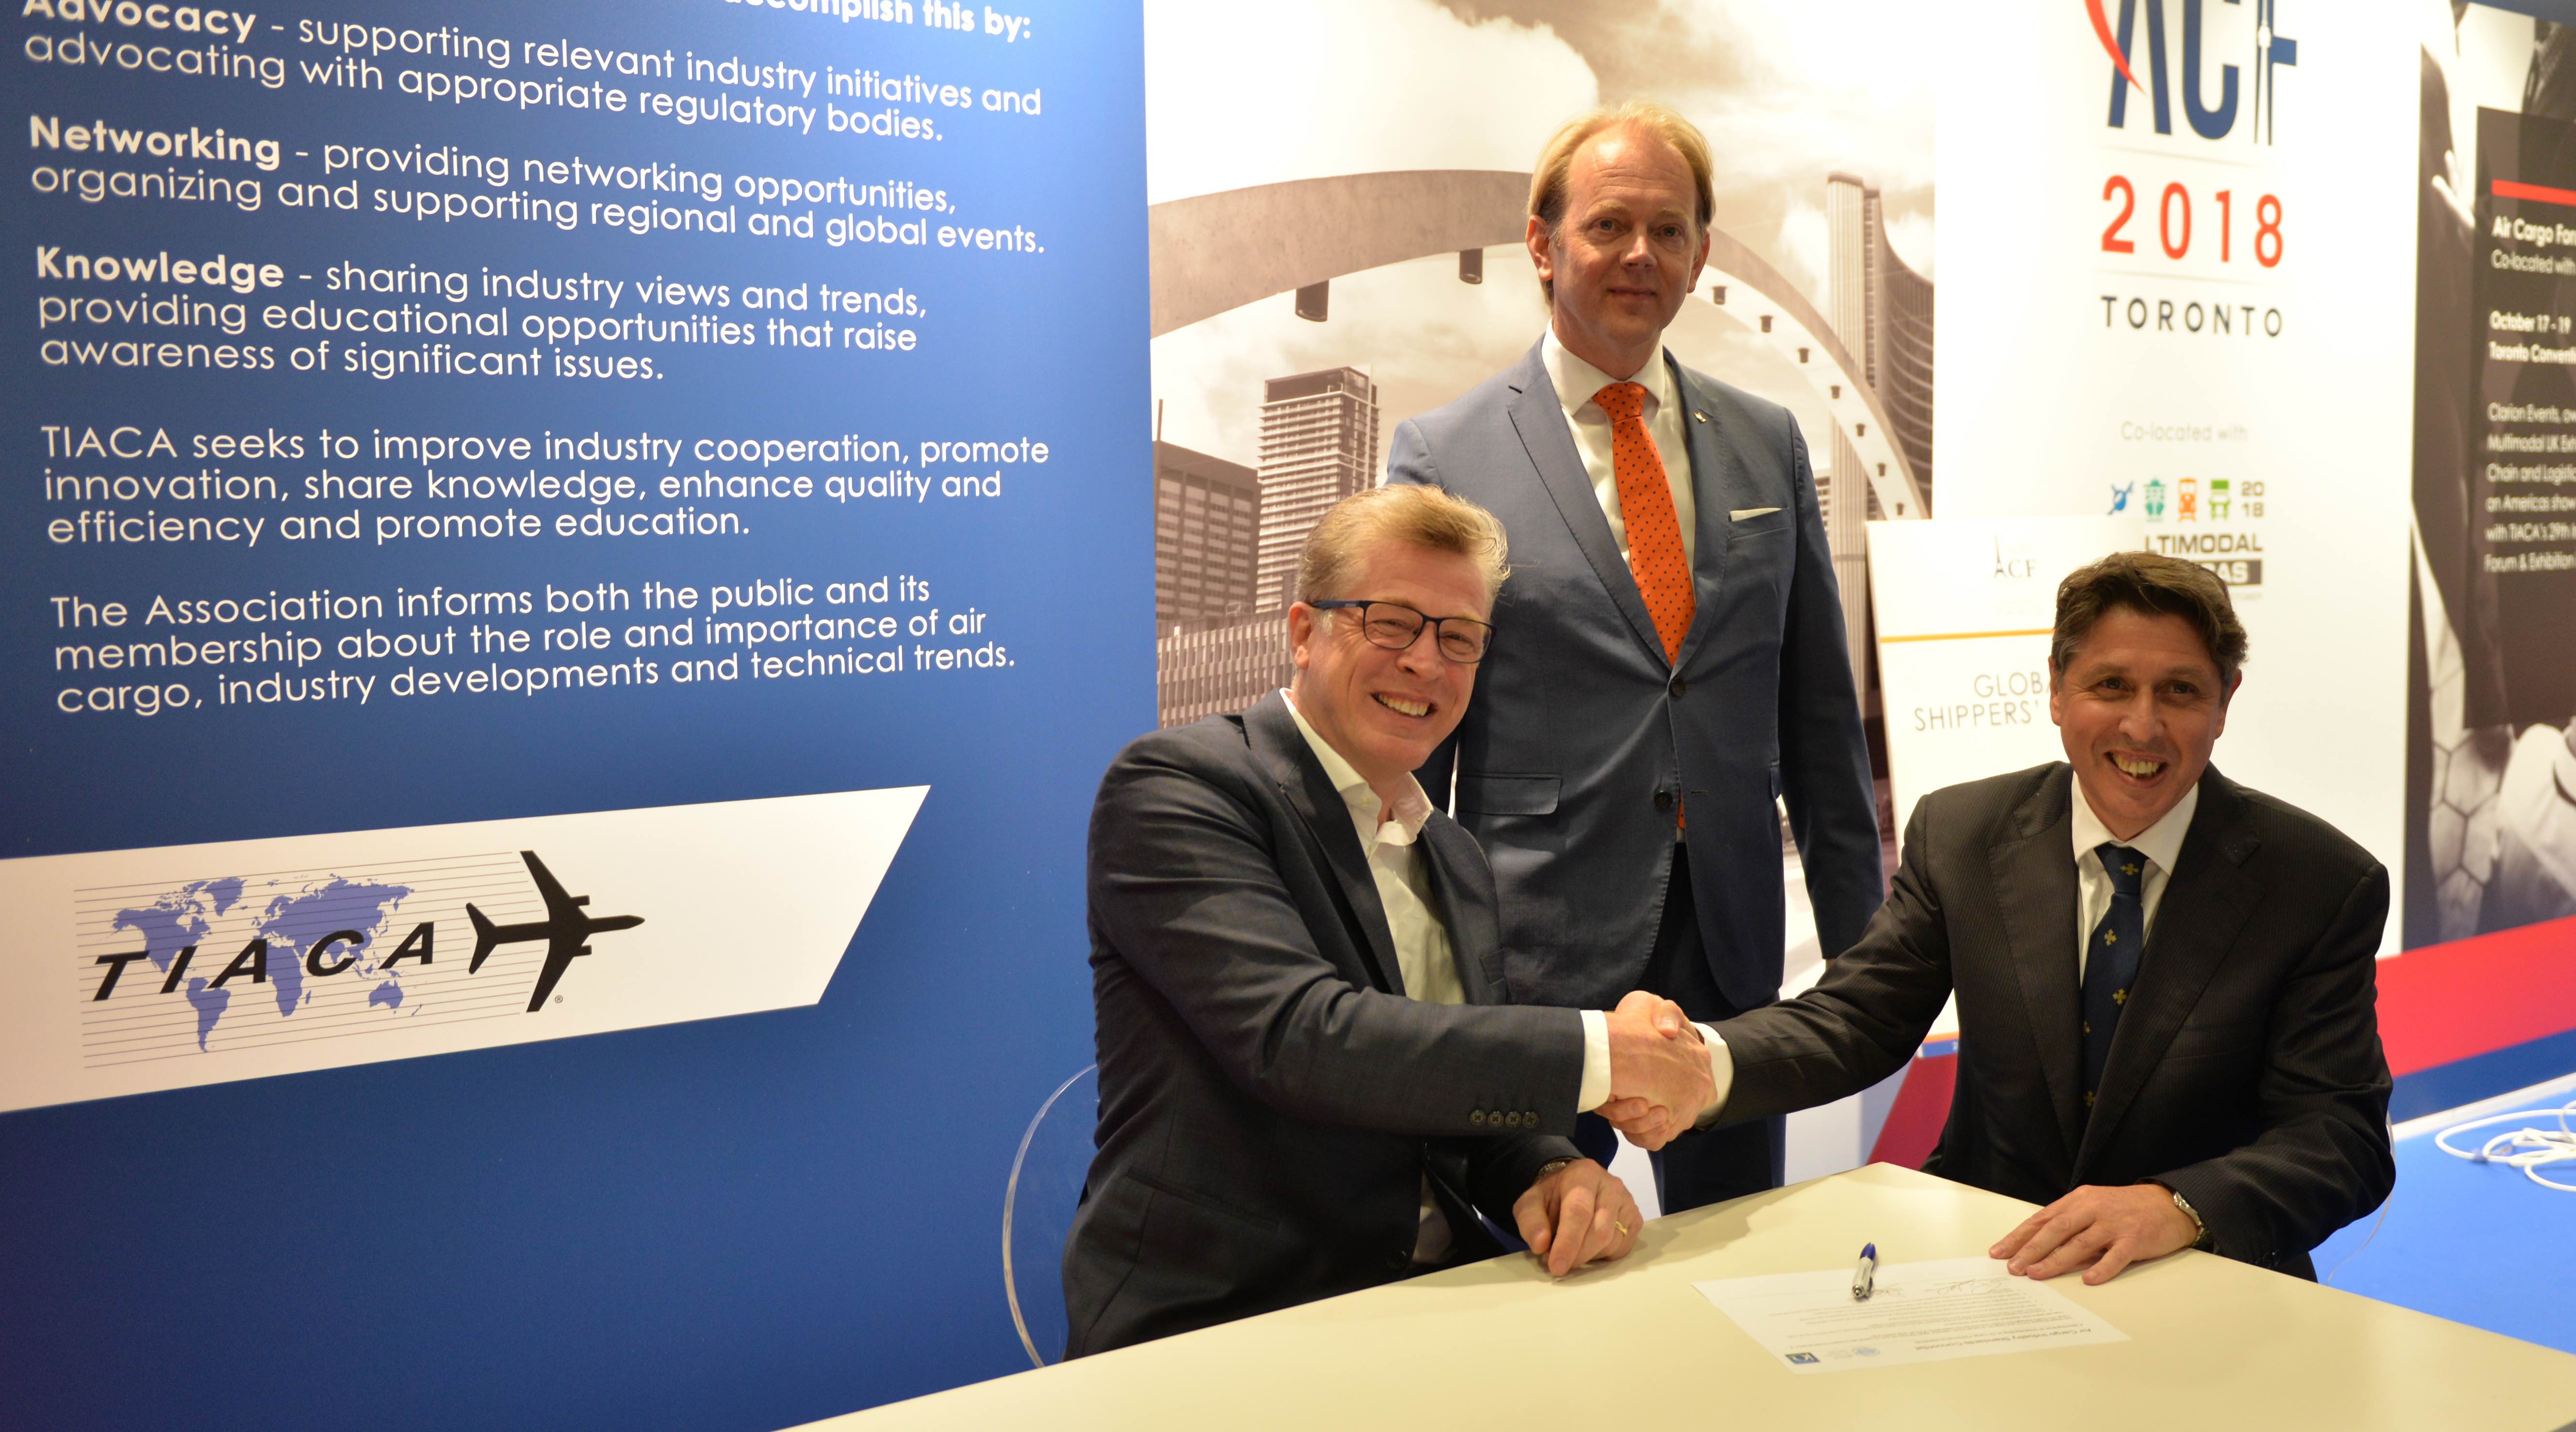  (l-r) Ariaen Zimmerman, executive director, Cargo iQ; Kester Meijer, director operational integrity, KLM, and vice chairman of Cargo iQ; Chris Welsh, secretary general of Global Shippers' Forum.